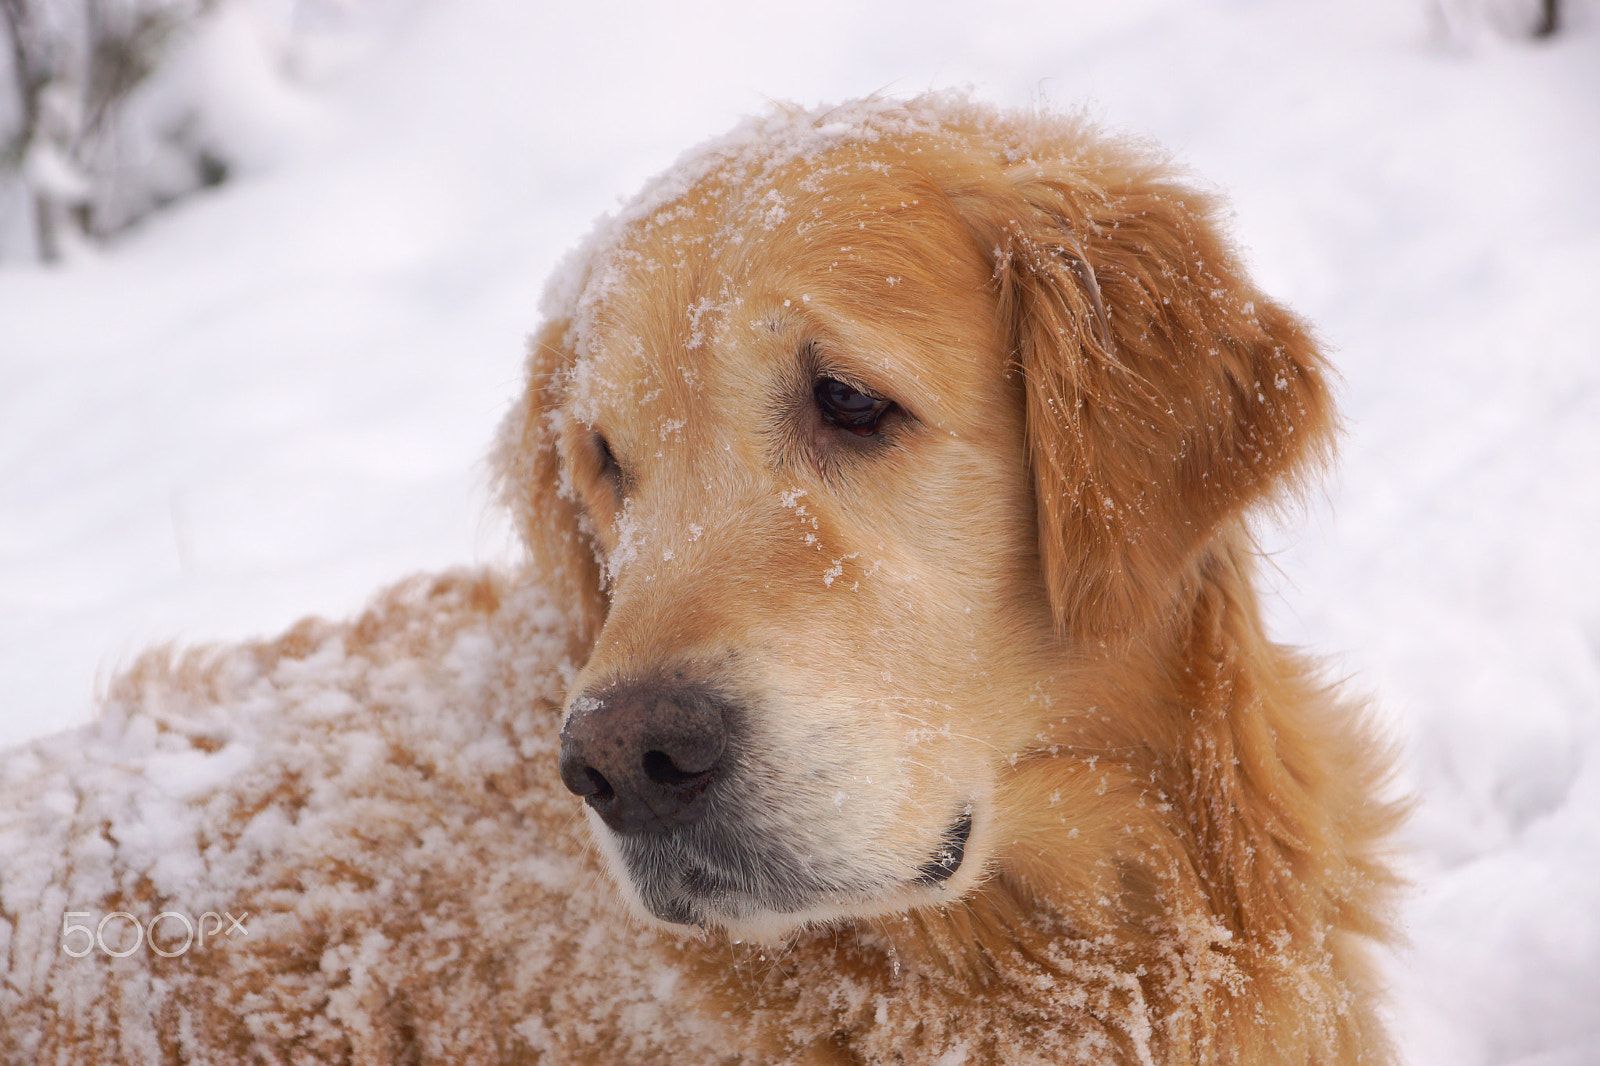 Sony SLT-A65 (SLT-A65V) sample photo. The dog breeds a golden retriever looking back, lying around and playing in white snow photography